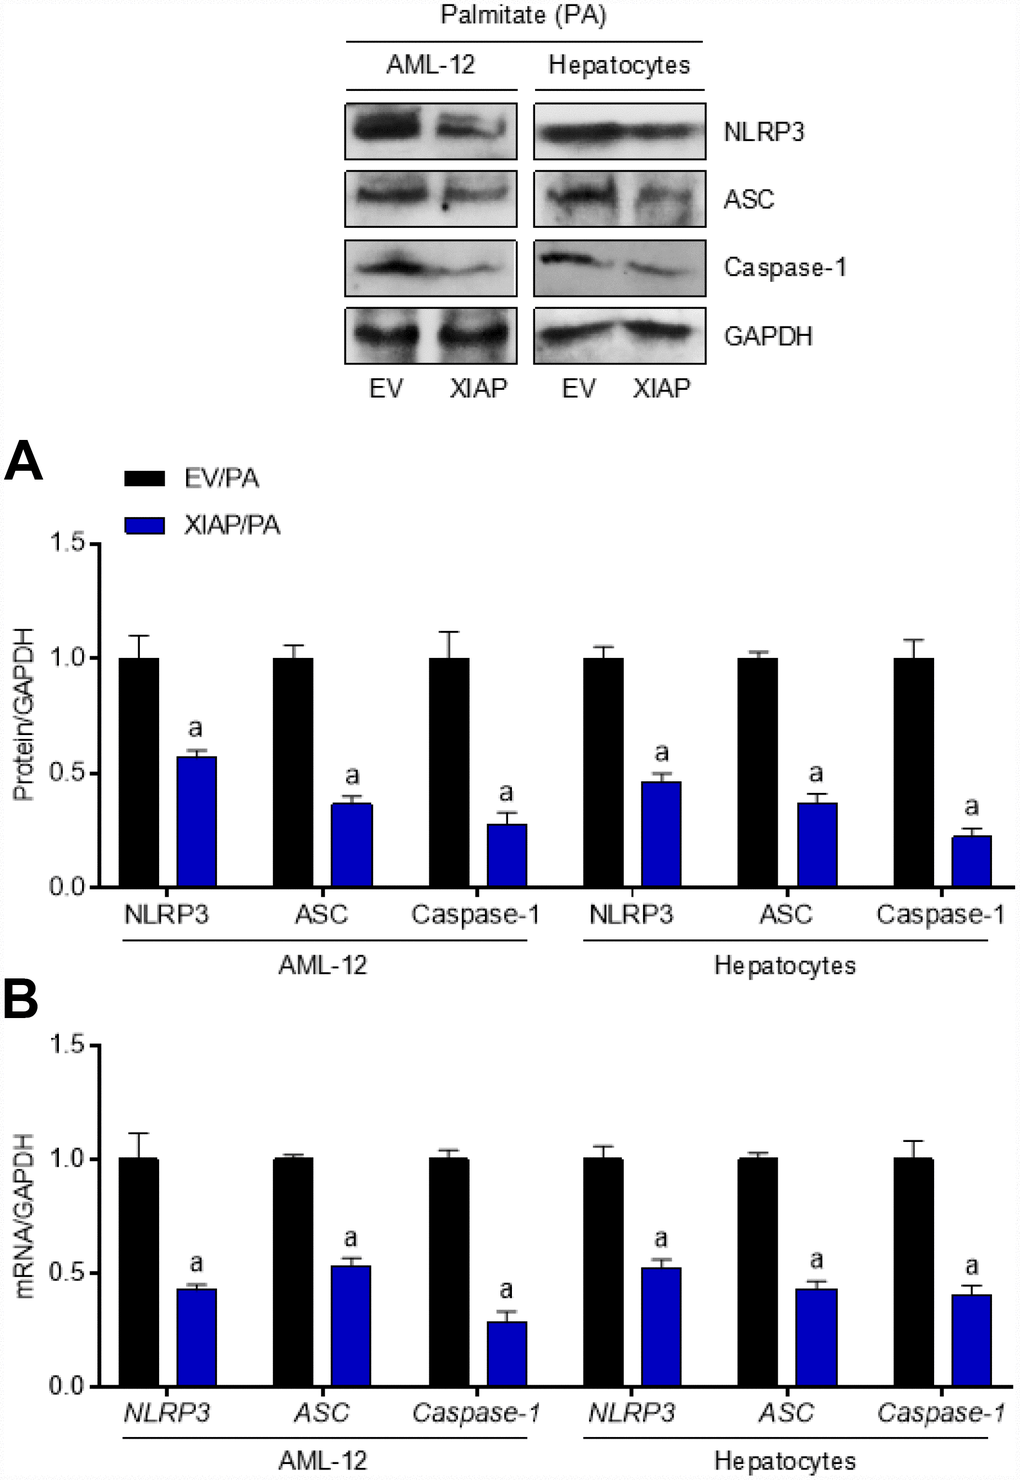 Up regulation of XIAP levels suppresses PA-triggered inflammation in vitro. AML-12 and primary hepatocytes were transfected with pUNO1/XIAP plasmid for 24 h, followed by PA (250 μM) treatment for additional 24 h. Then, further studies as exhibited were performed. (A and B) Representative western blot and qPCR detection showed the changes in mRNA and protein levels of NLRP3 inflammasome (NLRP3, ASC and Caspase-1) in PA-induced cells. For all bar plots shown, data are expressed as the mean ± SEM. n = 8 per group. ap 